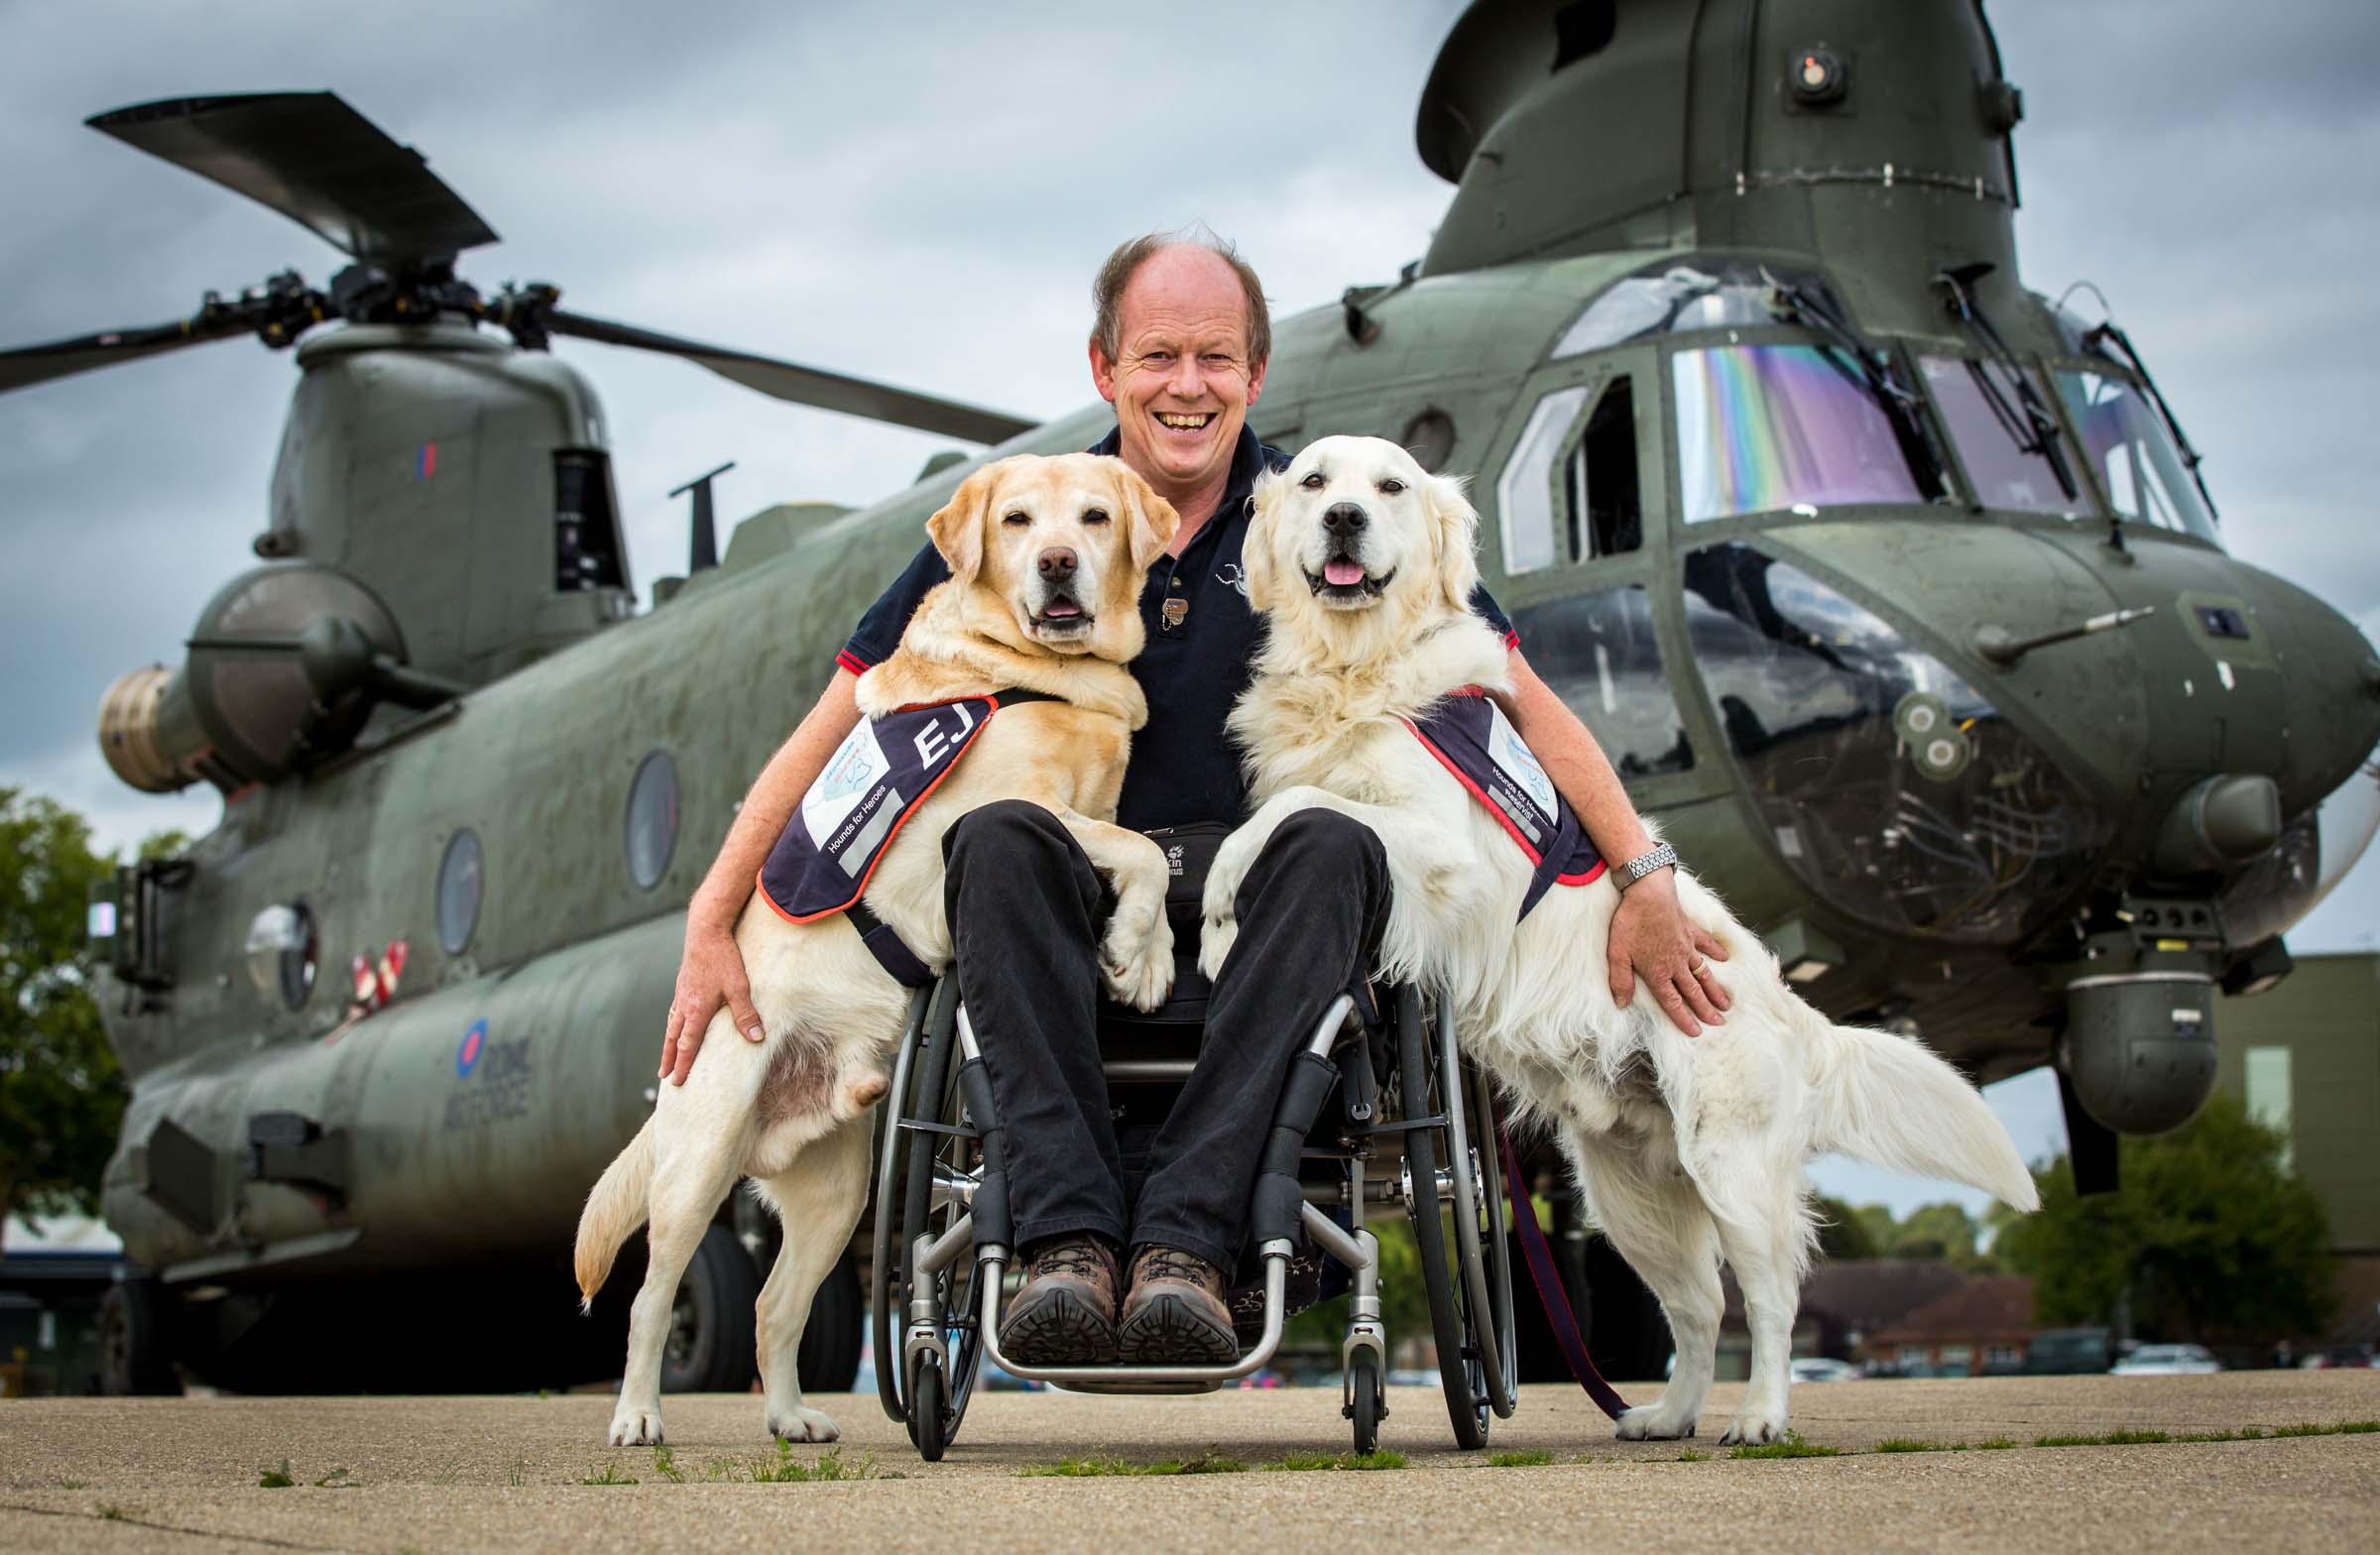 Hounds For Heroes Founder, Allen Patron, his wife and 3 of their dogs visited RAF Odiham to talk to RAF Odiham personnel about Hounds For Heroes.Allen also went to visit 18 Squadron and get photographs on the ramp of a Chinook and on the pan in front of a Chinook, with the dogs that he brought with him.Image Credit: SAC Pippa FowlesFor further information please contact: SAC Pippa Fowles, Ground Photographic Section, RAF Odiham, Odiham, RG29 1QTTel: 01256 367289 / 01256 367946MoD Consent Form (2012DIN05-006 Annex A) held by SAC Philippa Fowles, RAF Odiham, Odiham